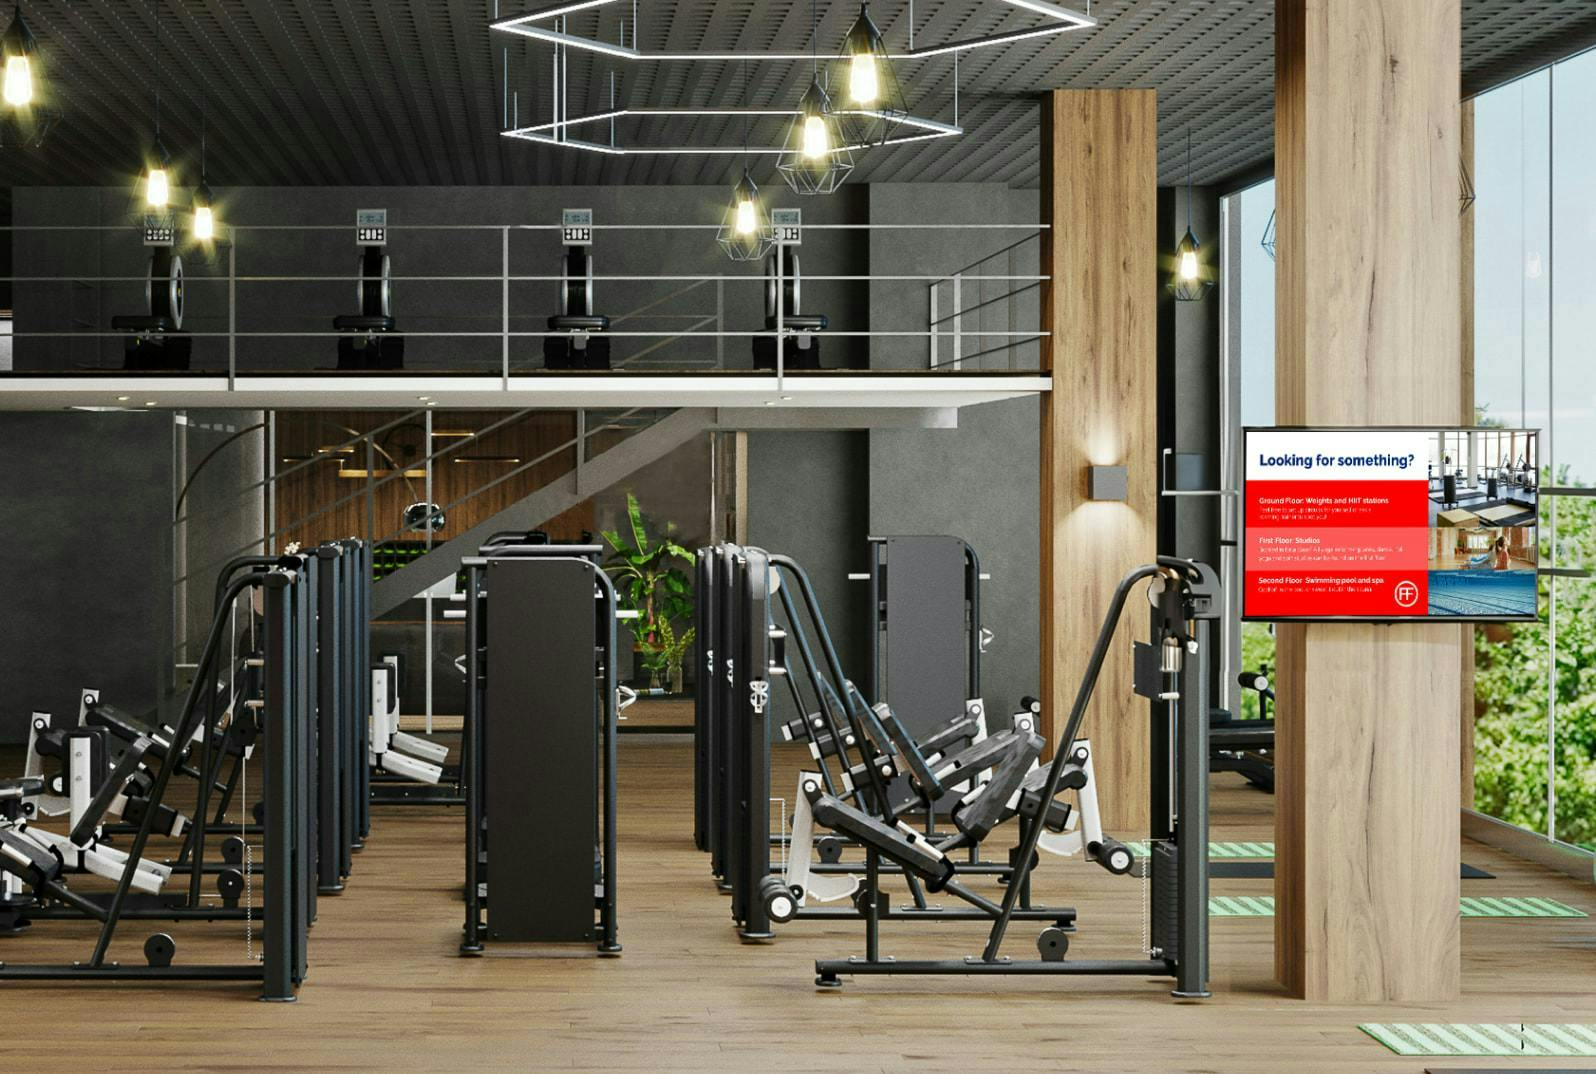 Share promotional content with digital displays in gyms